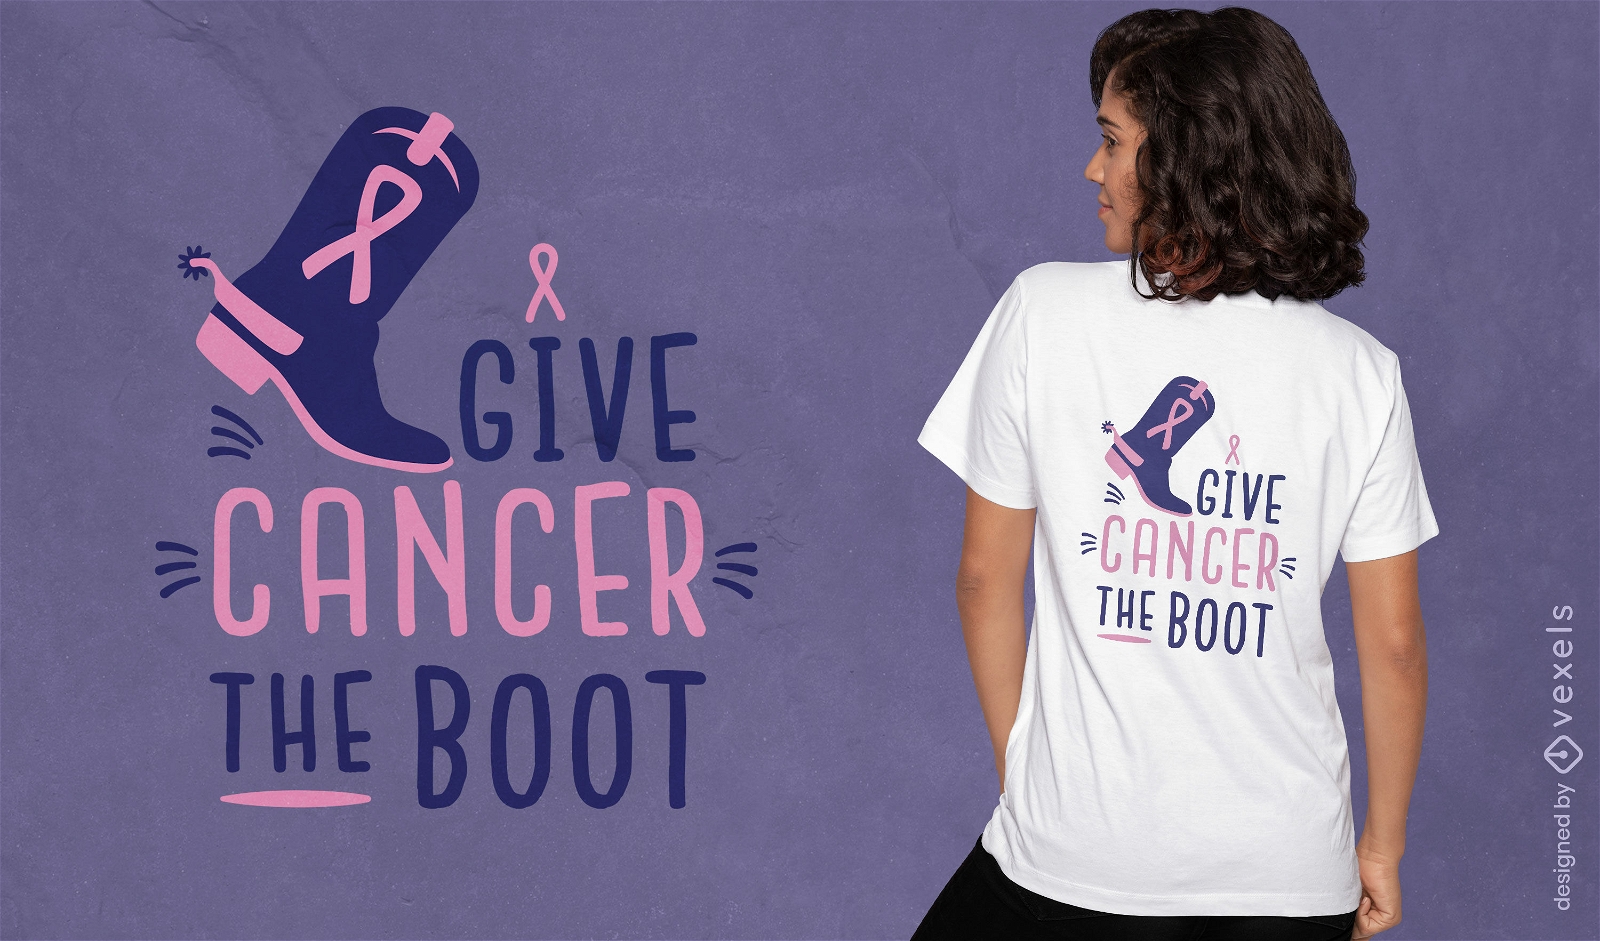 Give cancer the boot t-shirt design